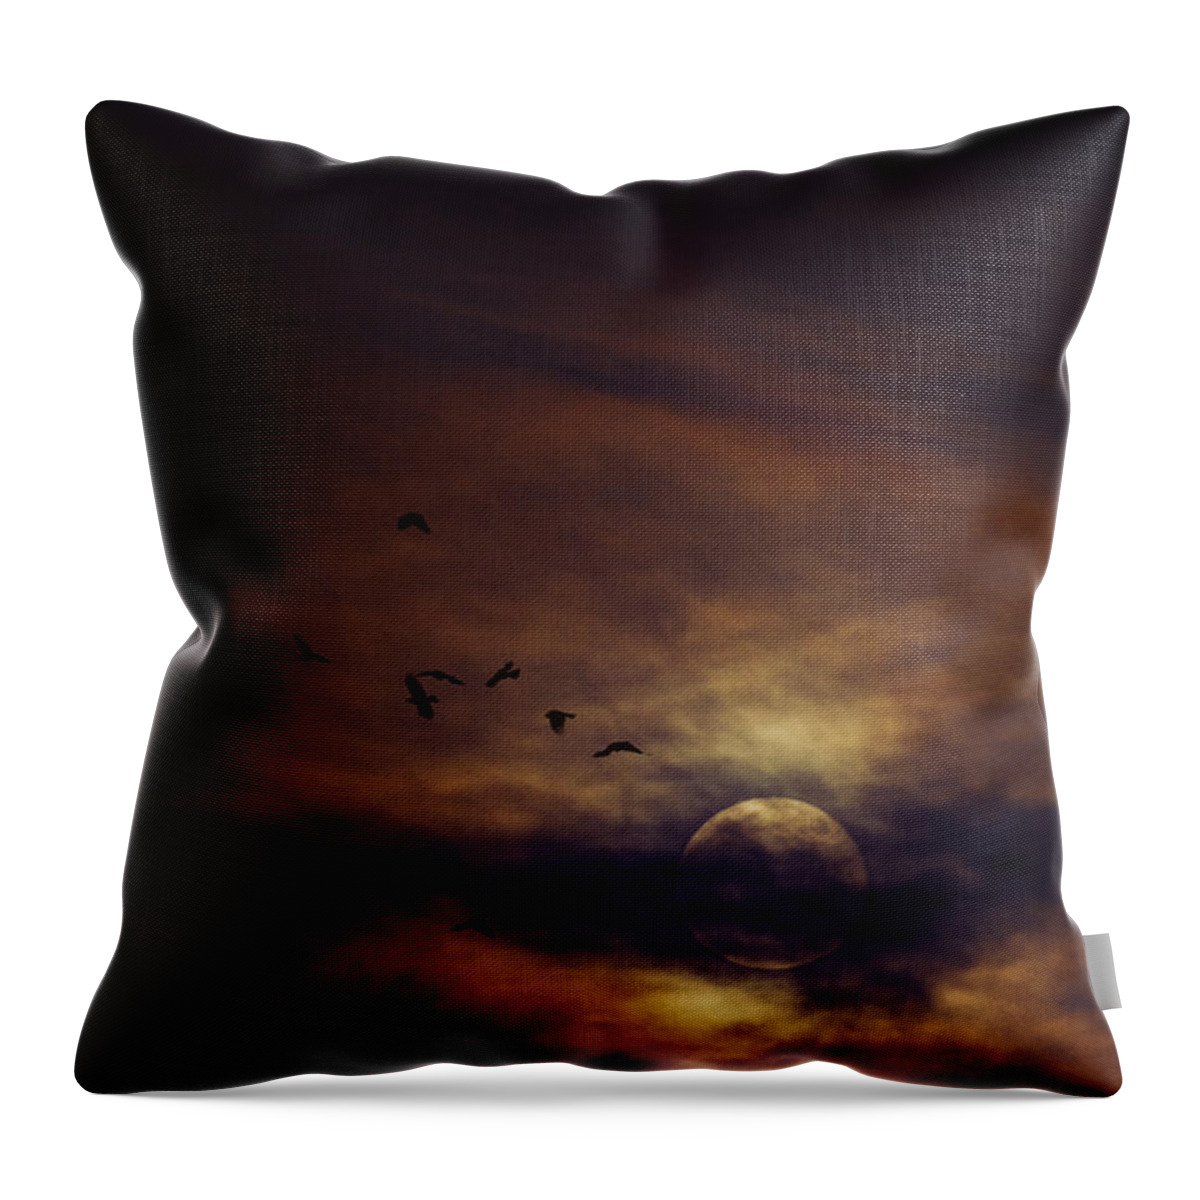 Harvest Moon Throw Pillow featuring the photograph Harvest Moon Over Texas by Karen Slagle